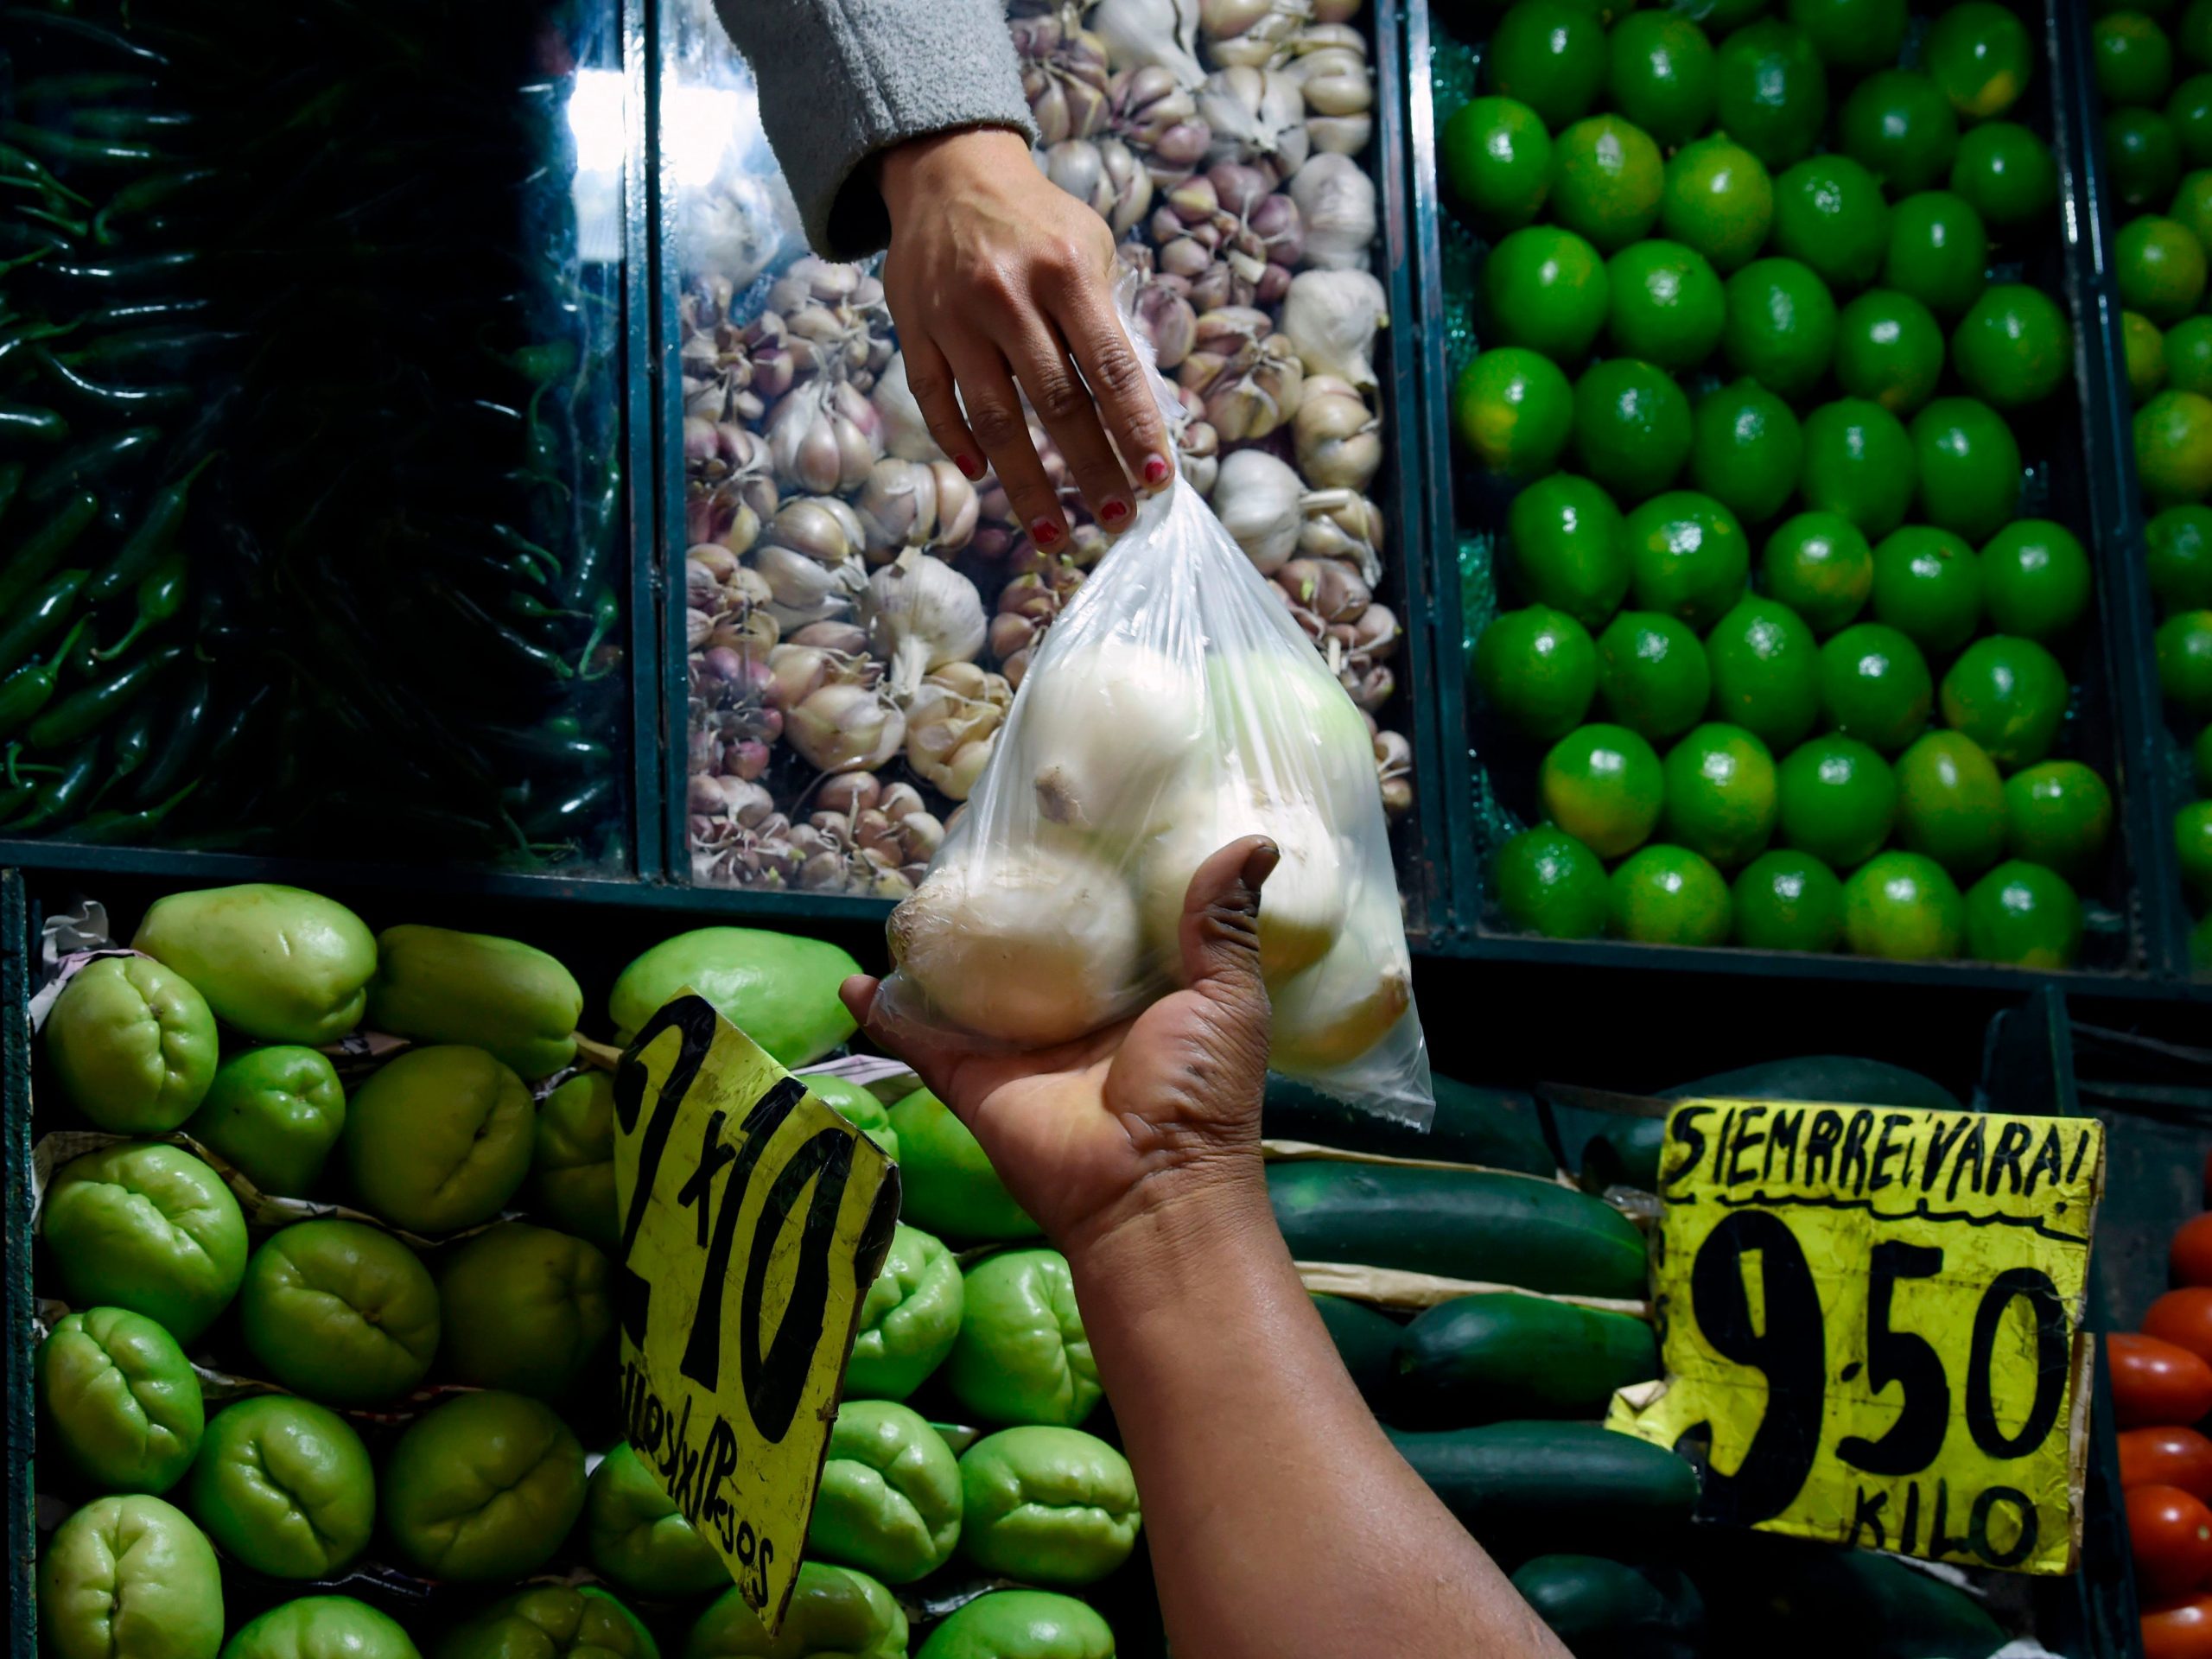 A customer buys onions at the "Central de Abasto" wholesale market in Mexico City on January 14, 2019. - Some 500,000 people and 62,000 vehicles a day visit the Central de Abasto market on the east side of Mexico City to buy and sell avocados, tomatoes and about 15,000 other products.